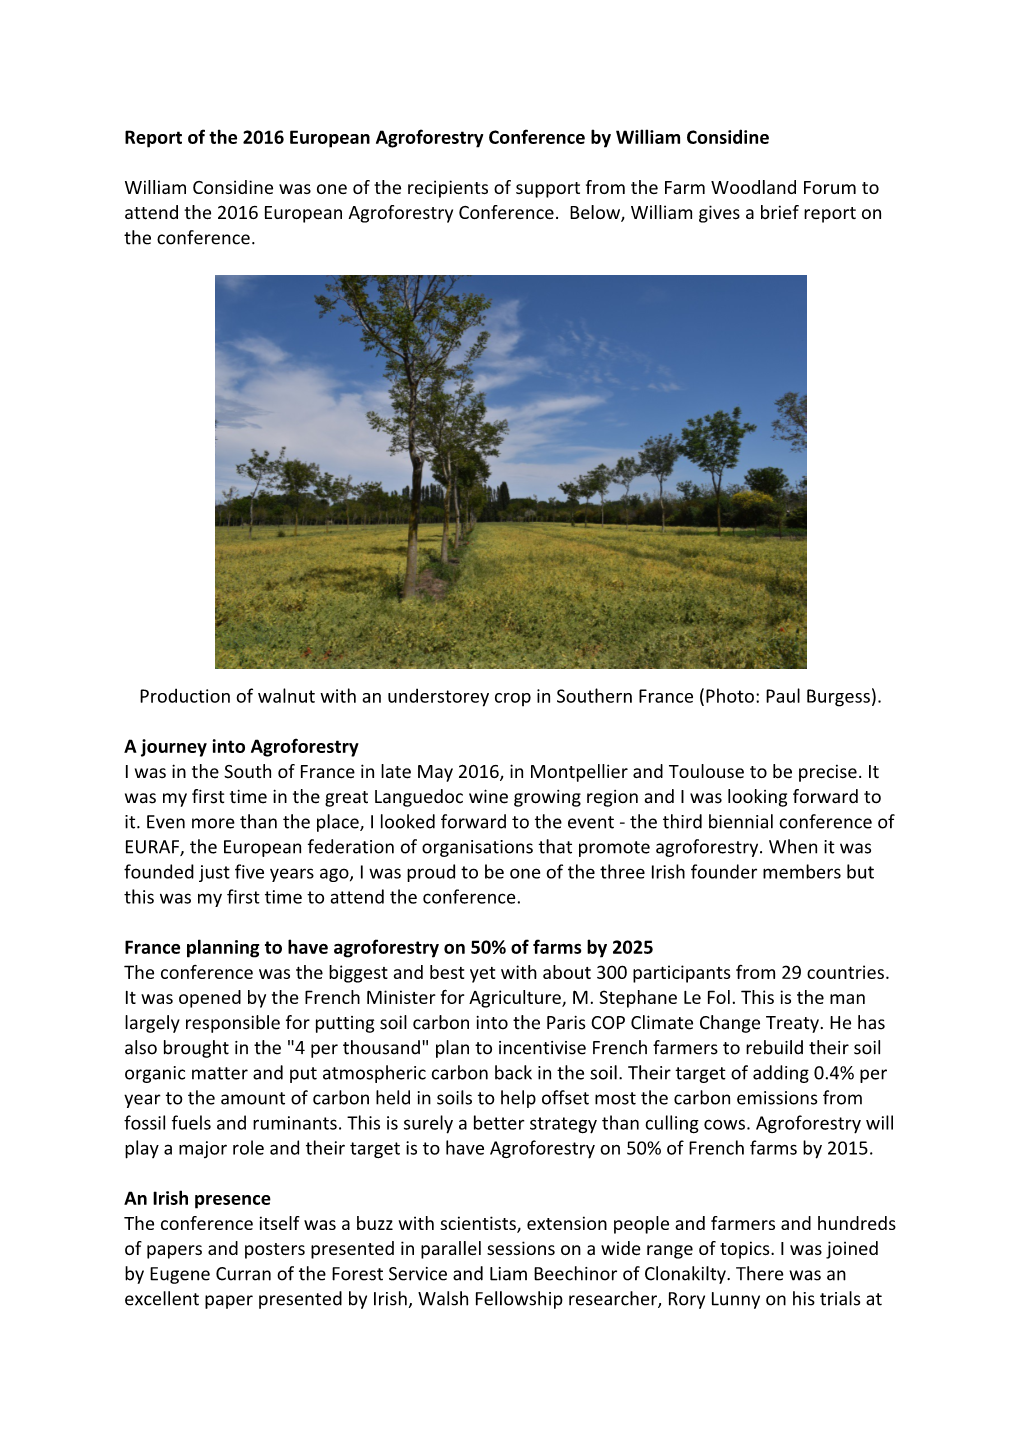 Report of the 2016 European Agroforestry Conference by William Considine